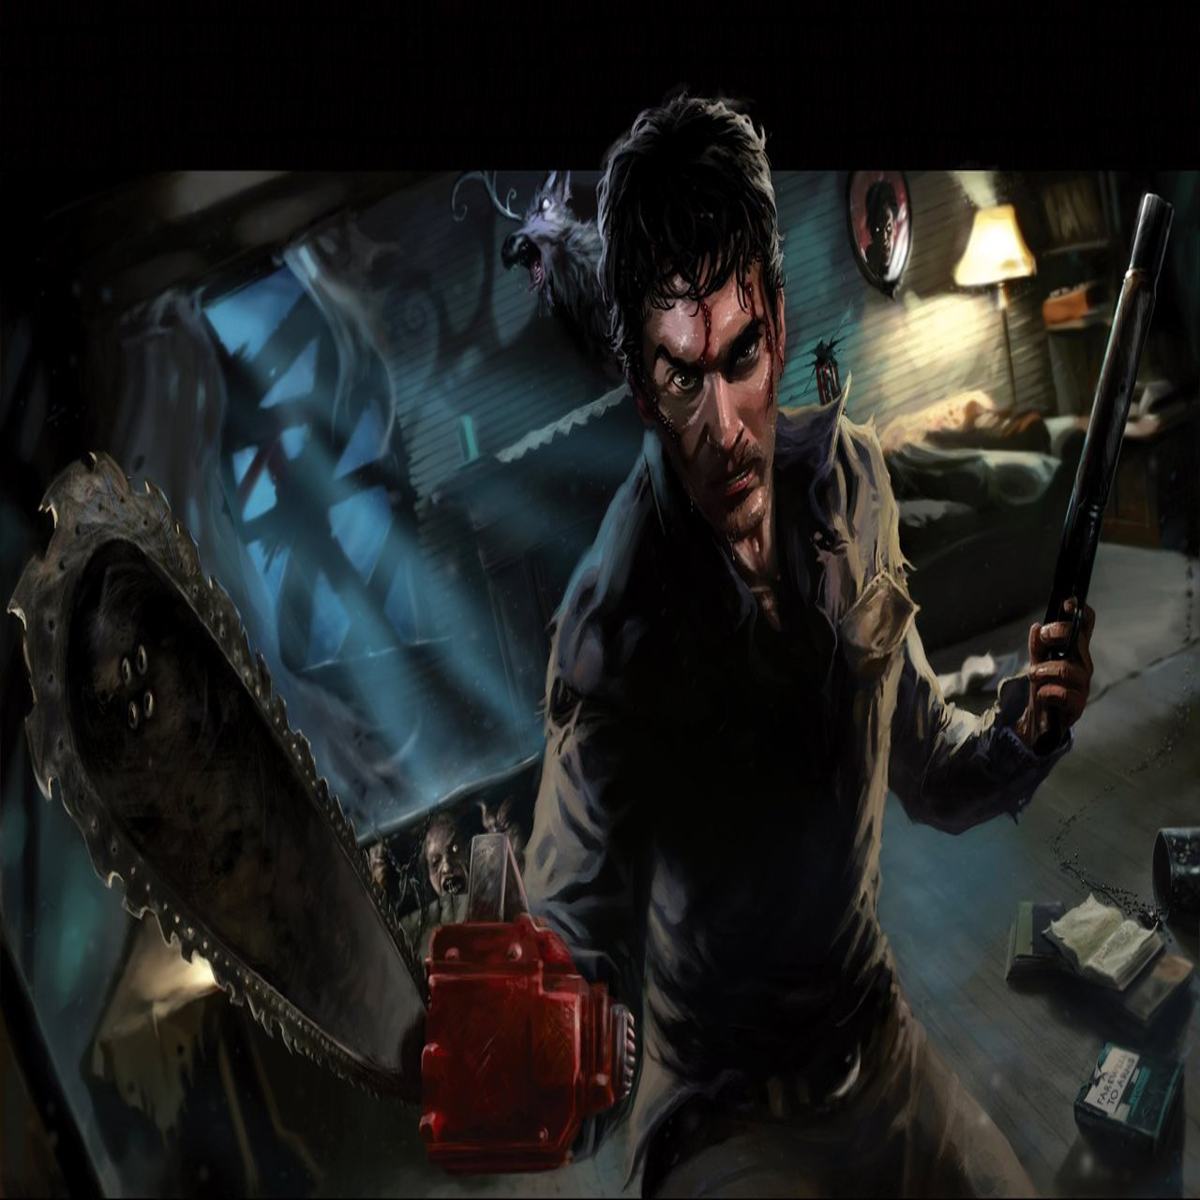 Here's the first major look at Evil Dead: The Game